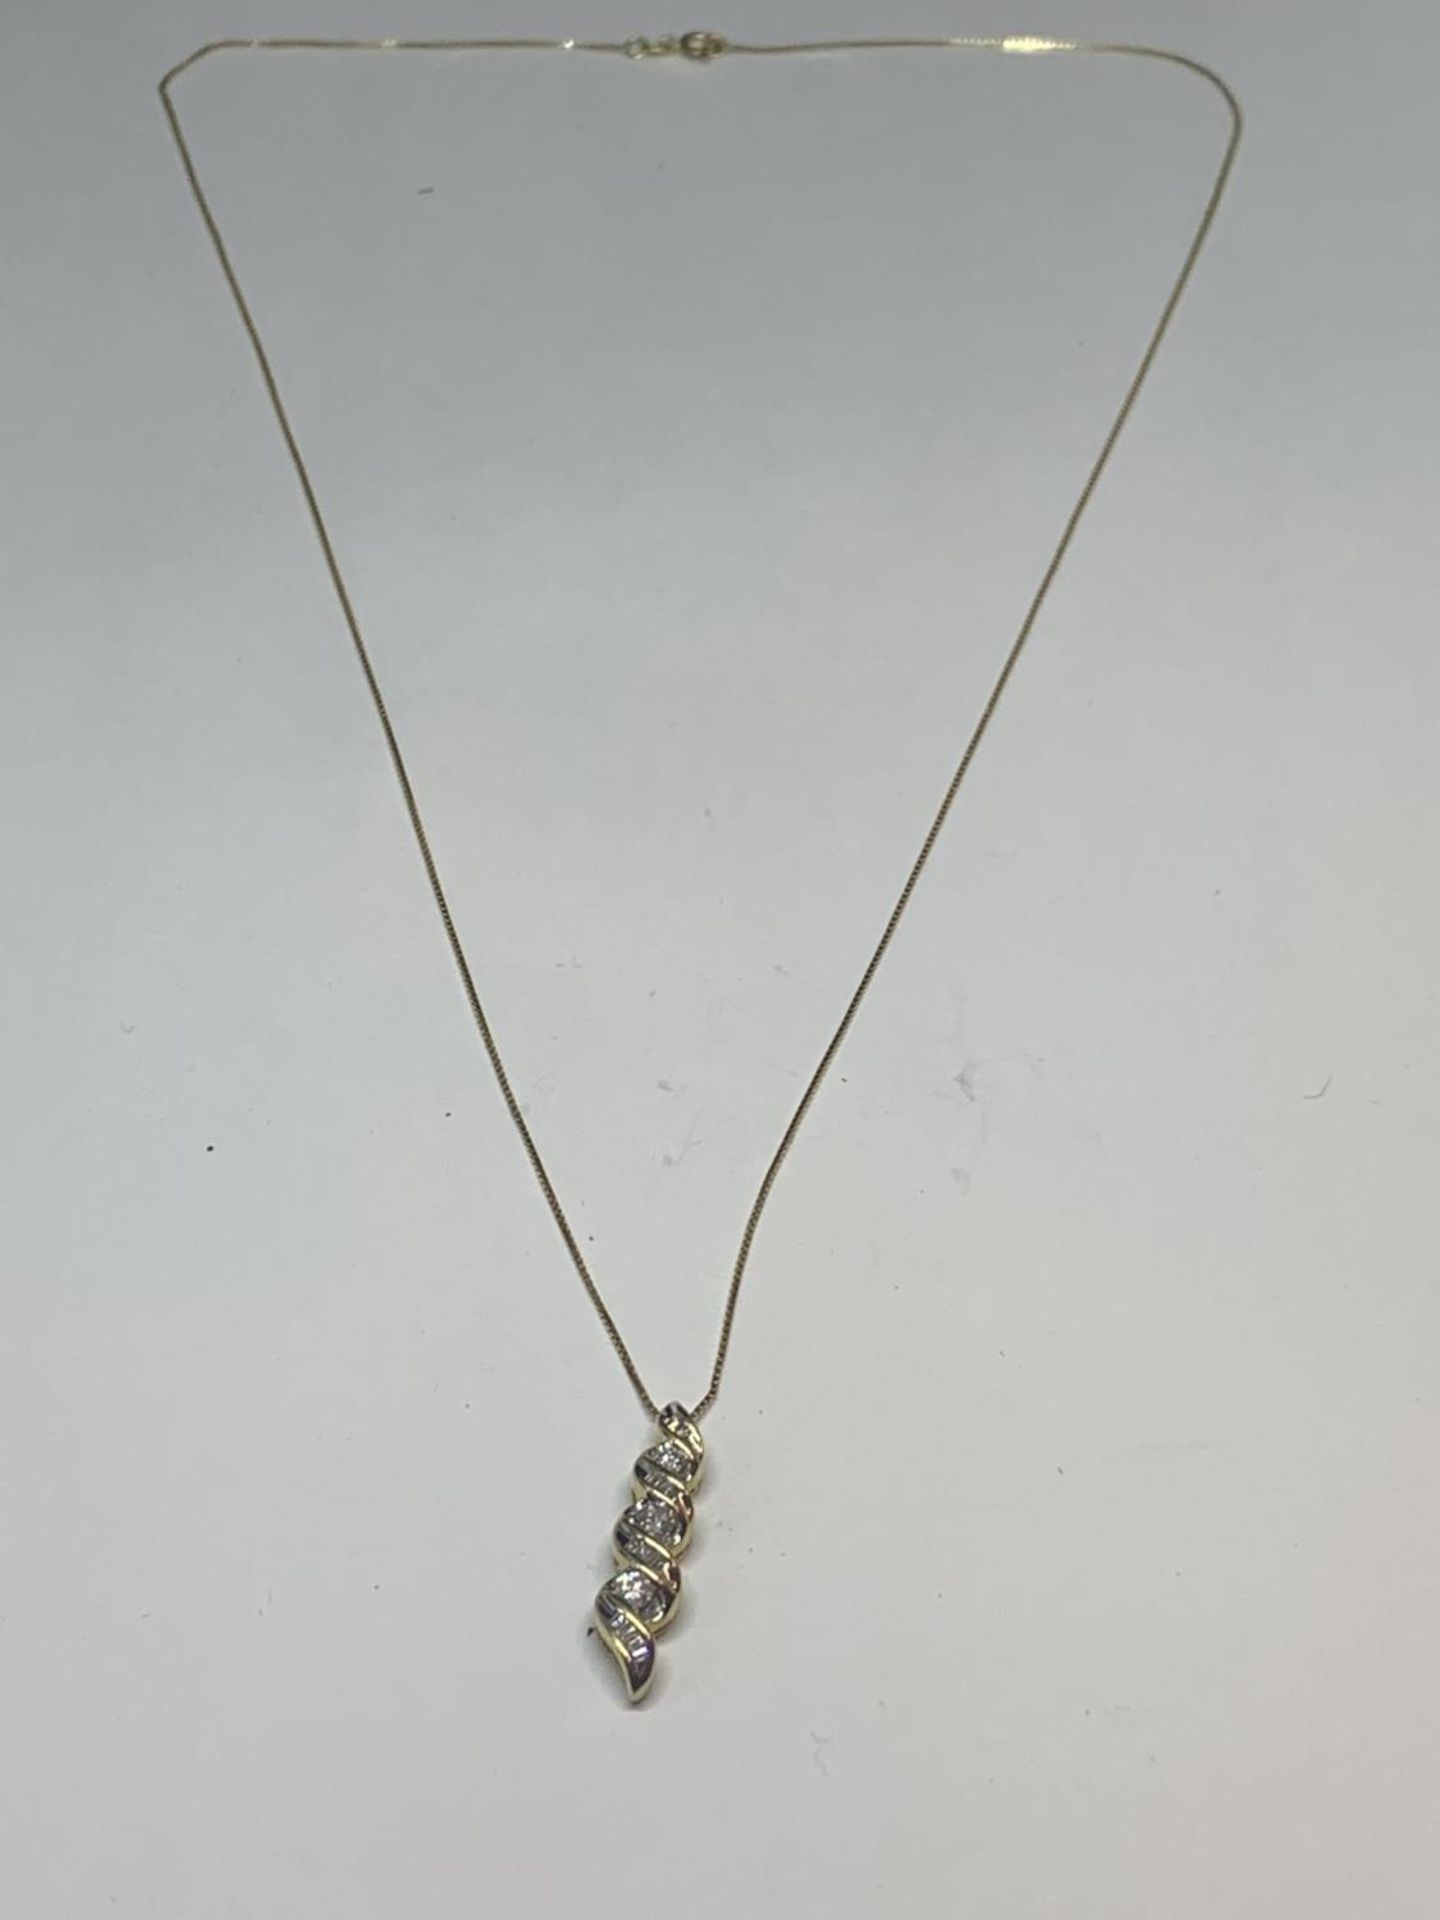 A 14 CARAT GOLD DROP PENDANT WITH APPROXIMATELY 1 CARAT OF DIAMONDS CHAIN LENGTH 45CM - Image 4 of 6